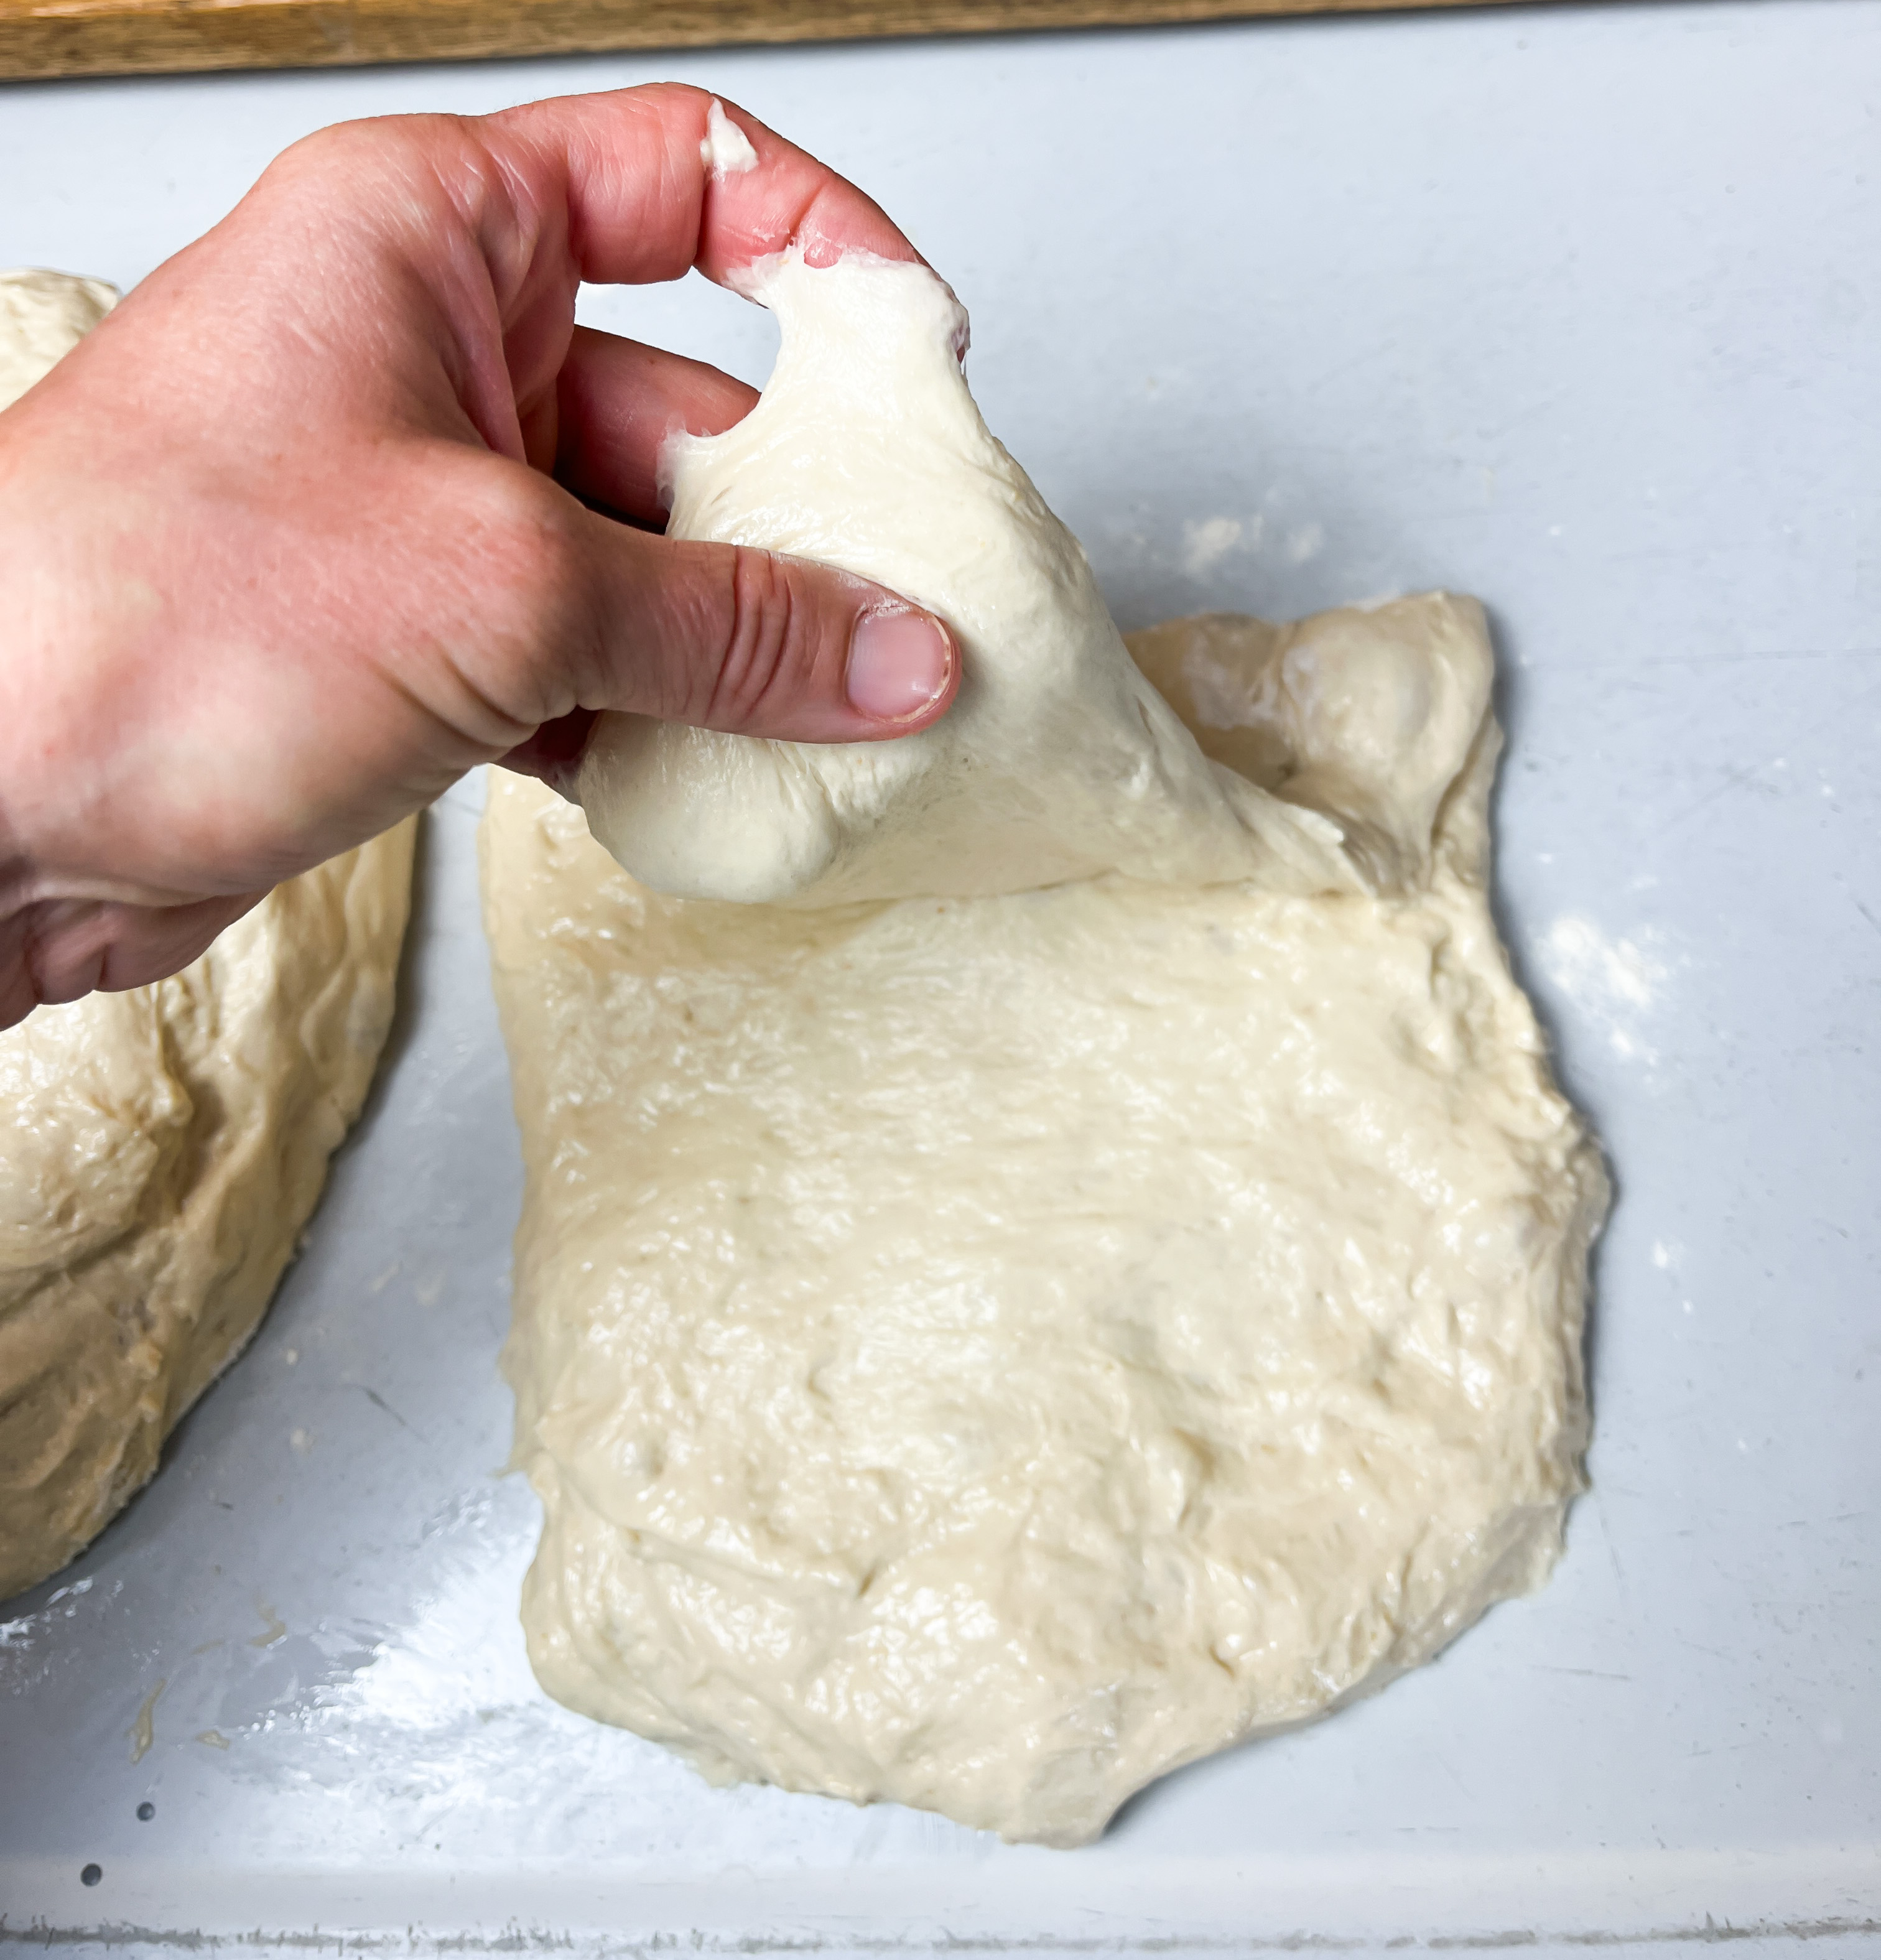 two divided piles of dough on a white countertop being folded over with a hand